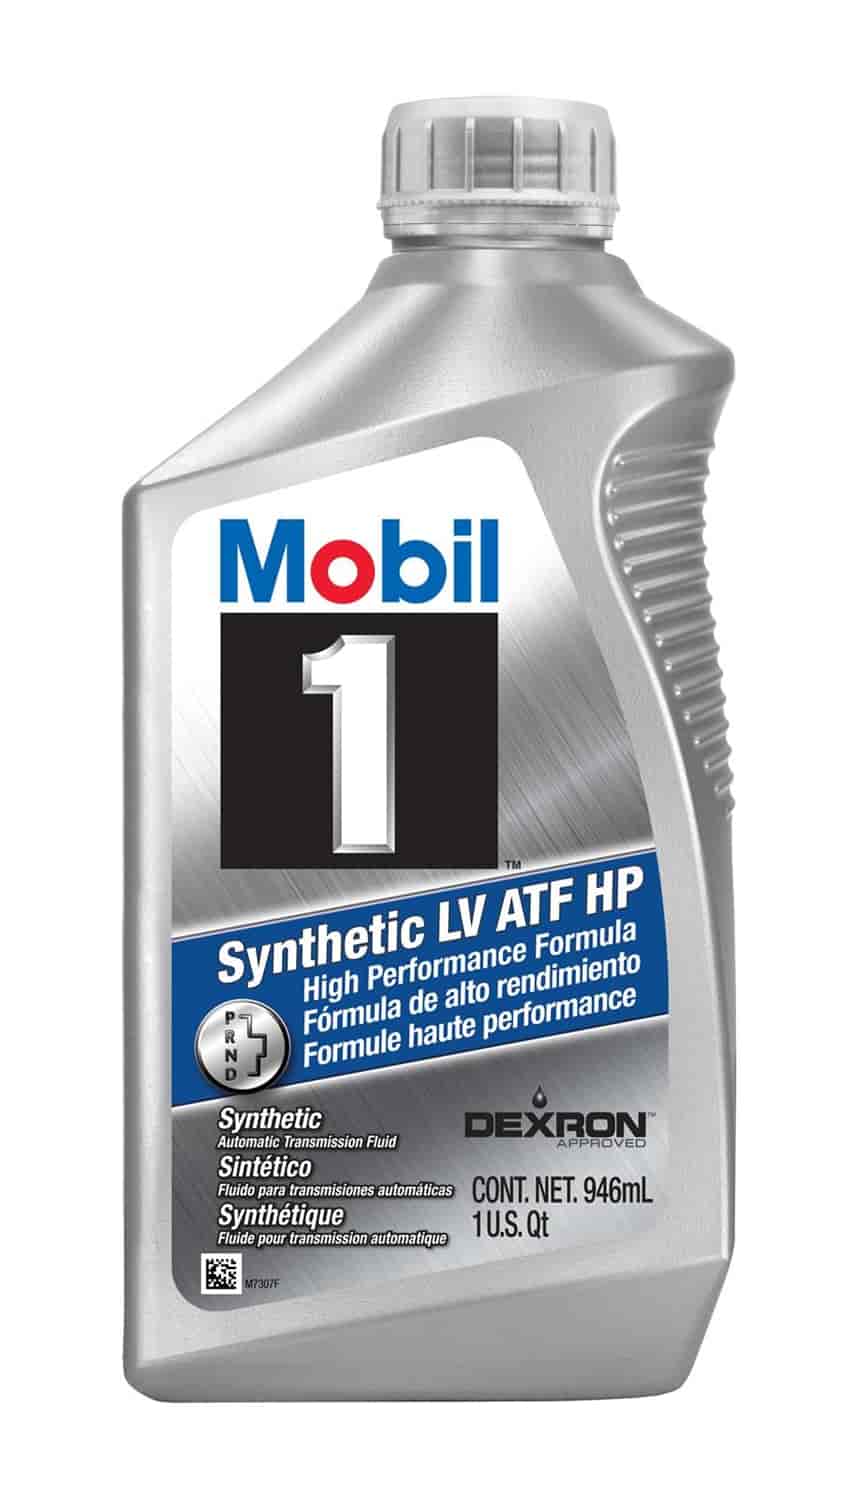 Synthetic LV ATF HP